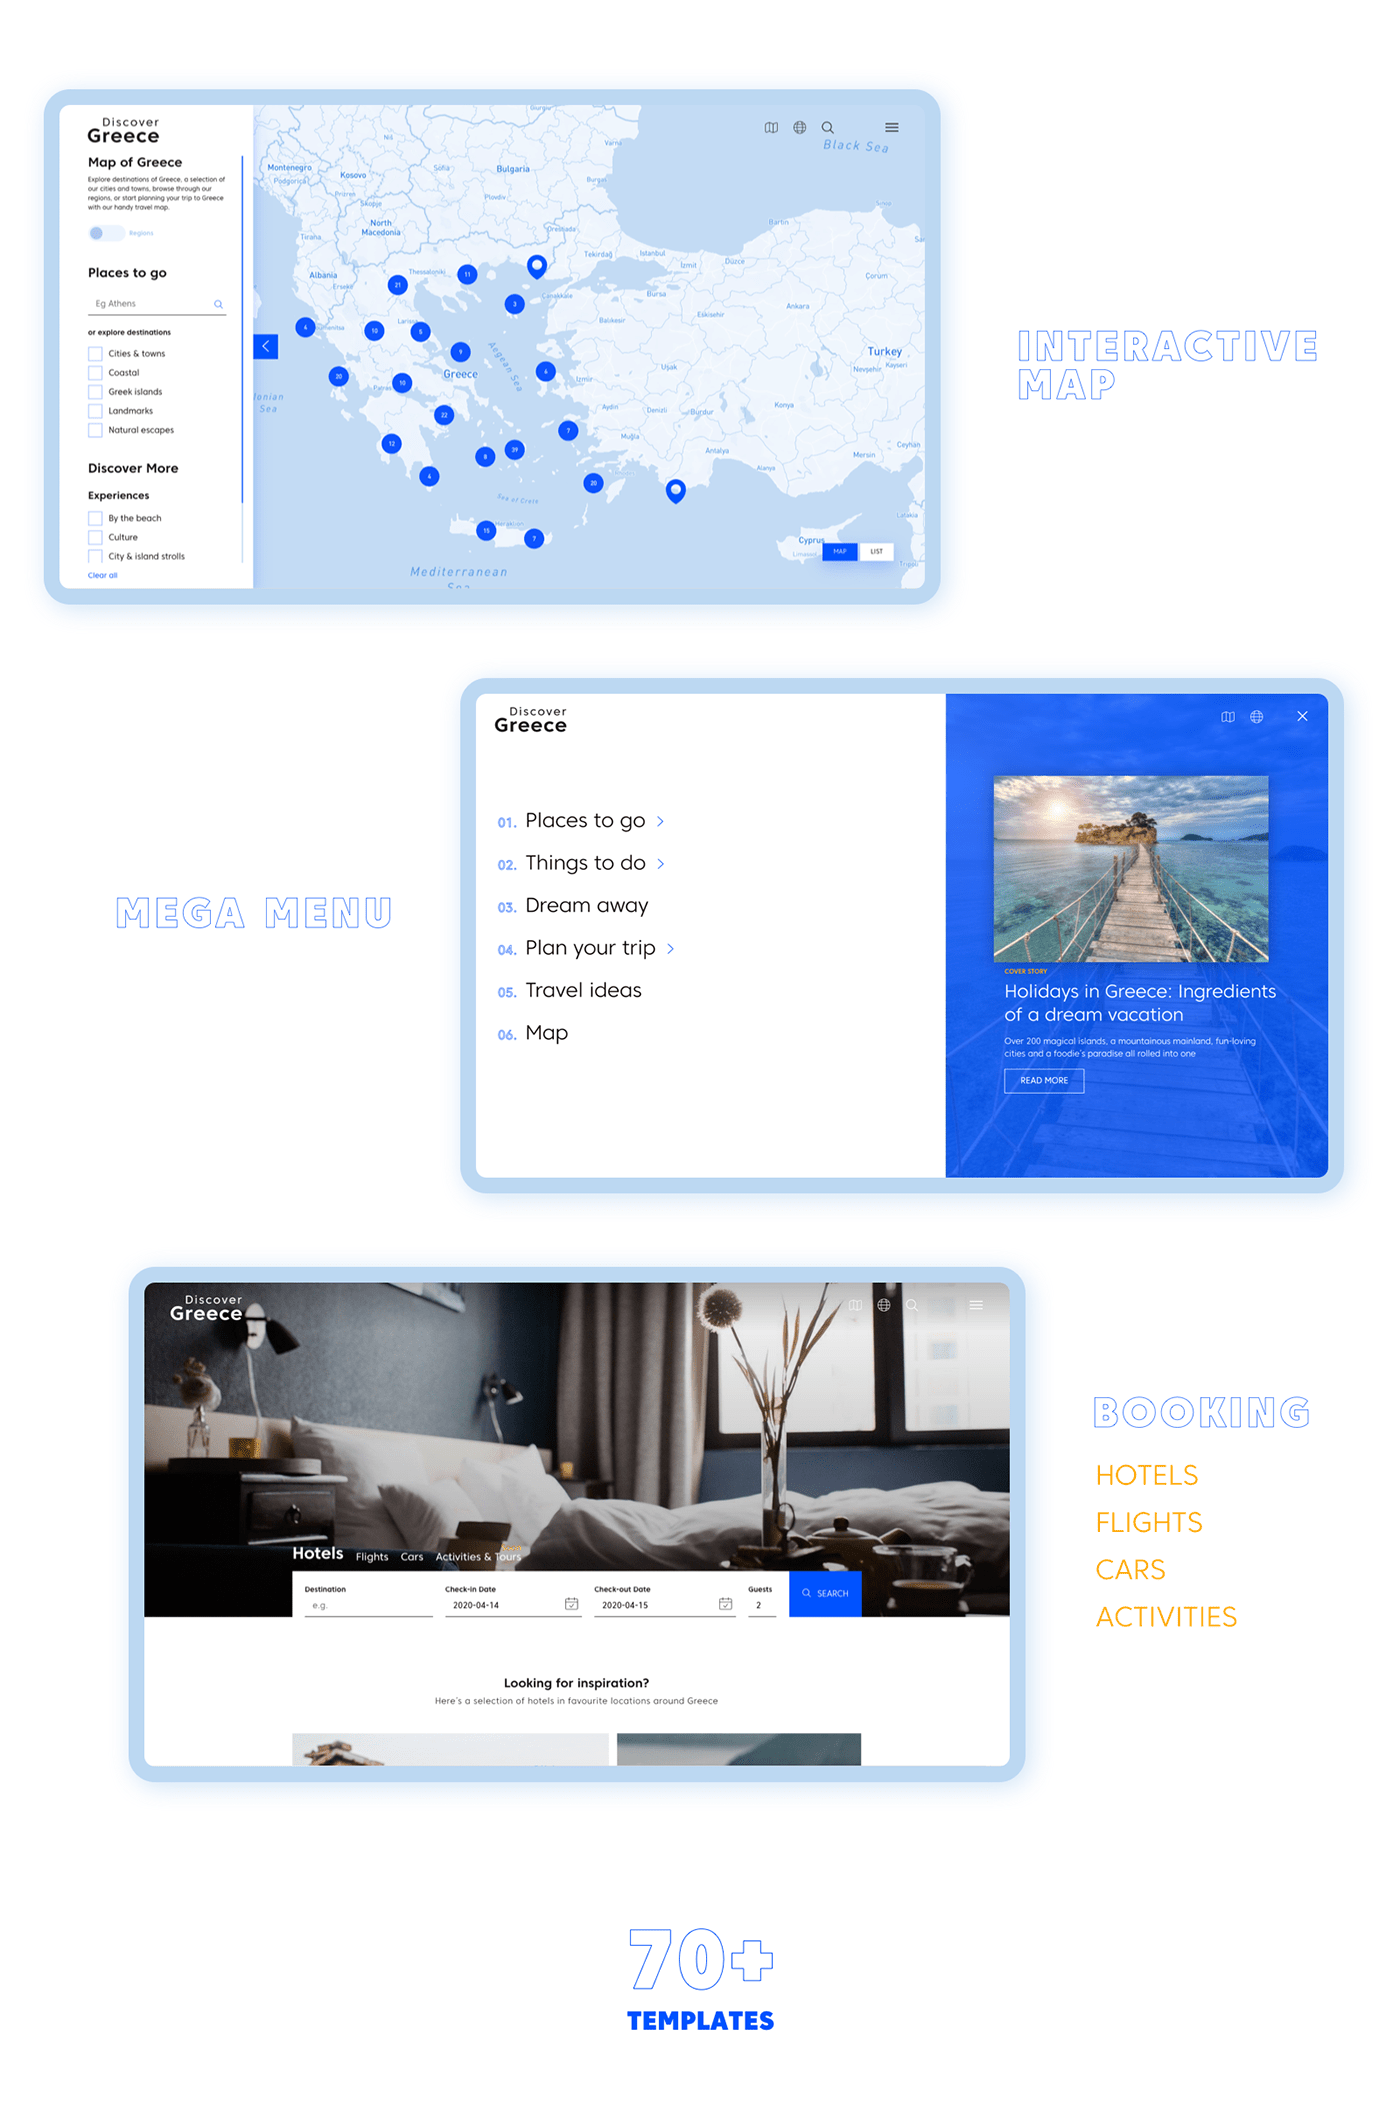 clean discover Greece hotels tour guide tourism ux/ui vacations Web Design  wedia